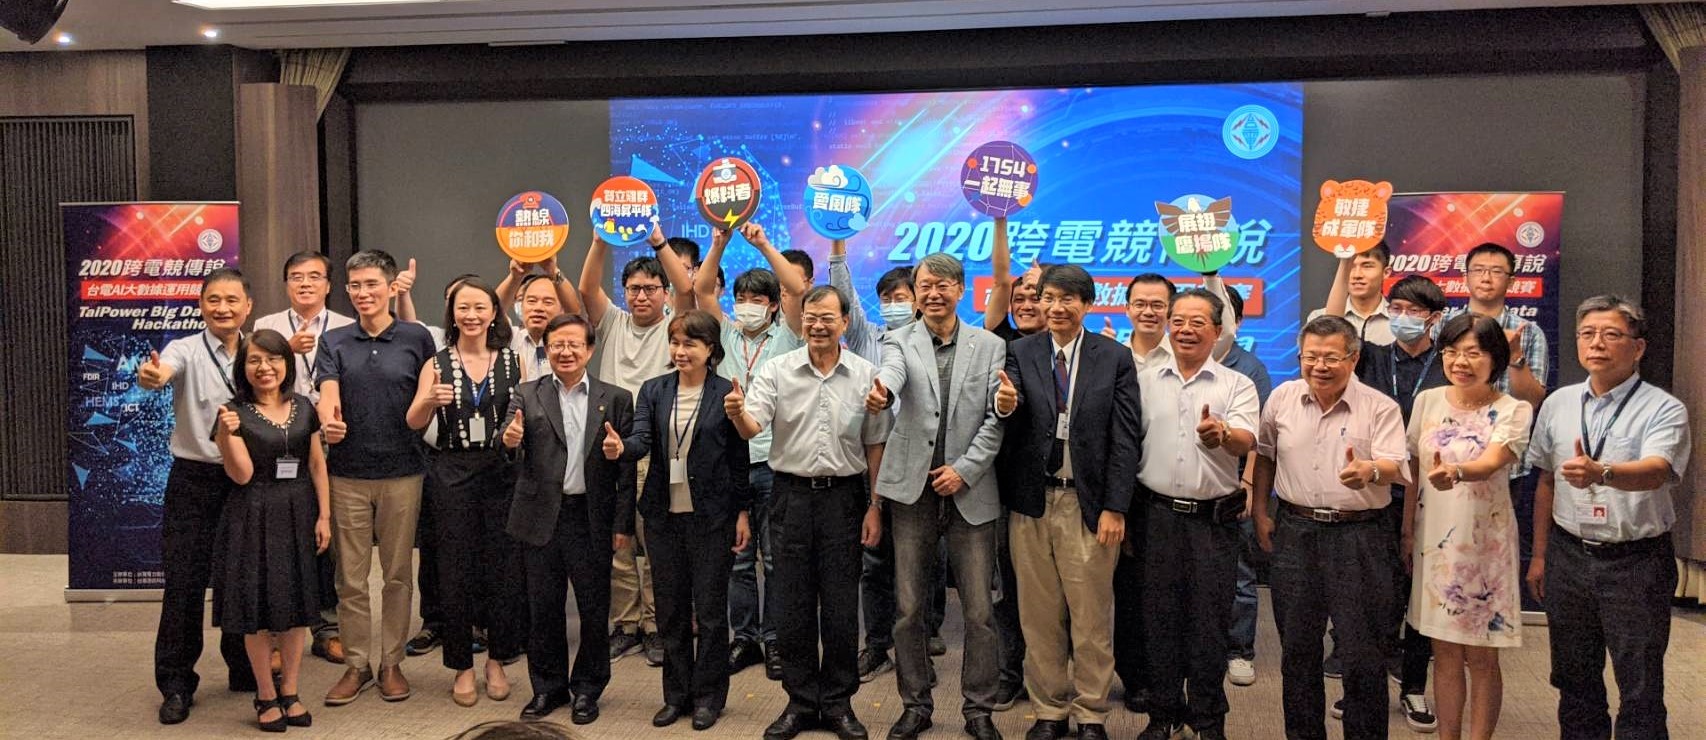 TaiPower Big Data Hackathon Starts. The group photo of all the participating teams and guests.